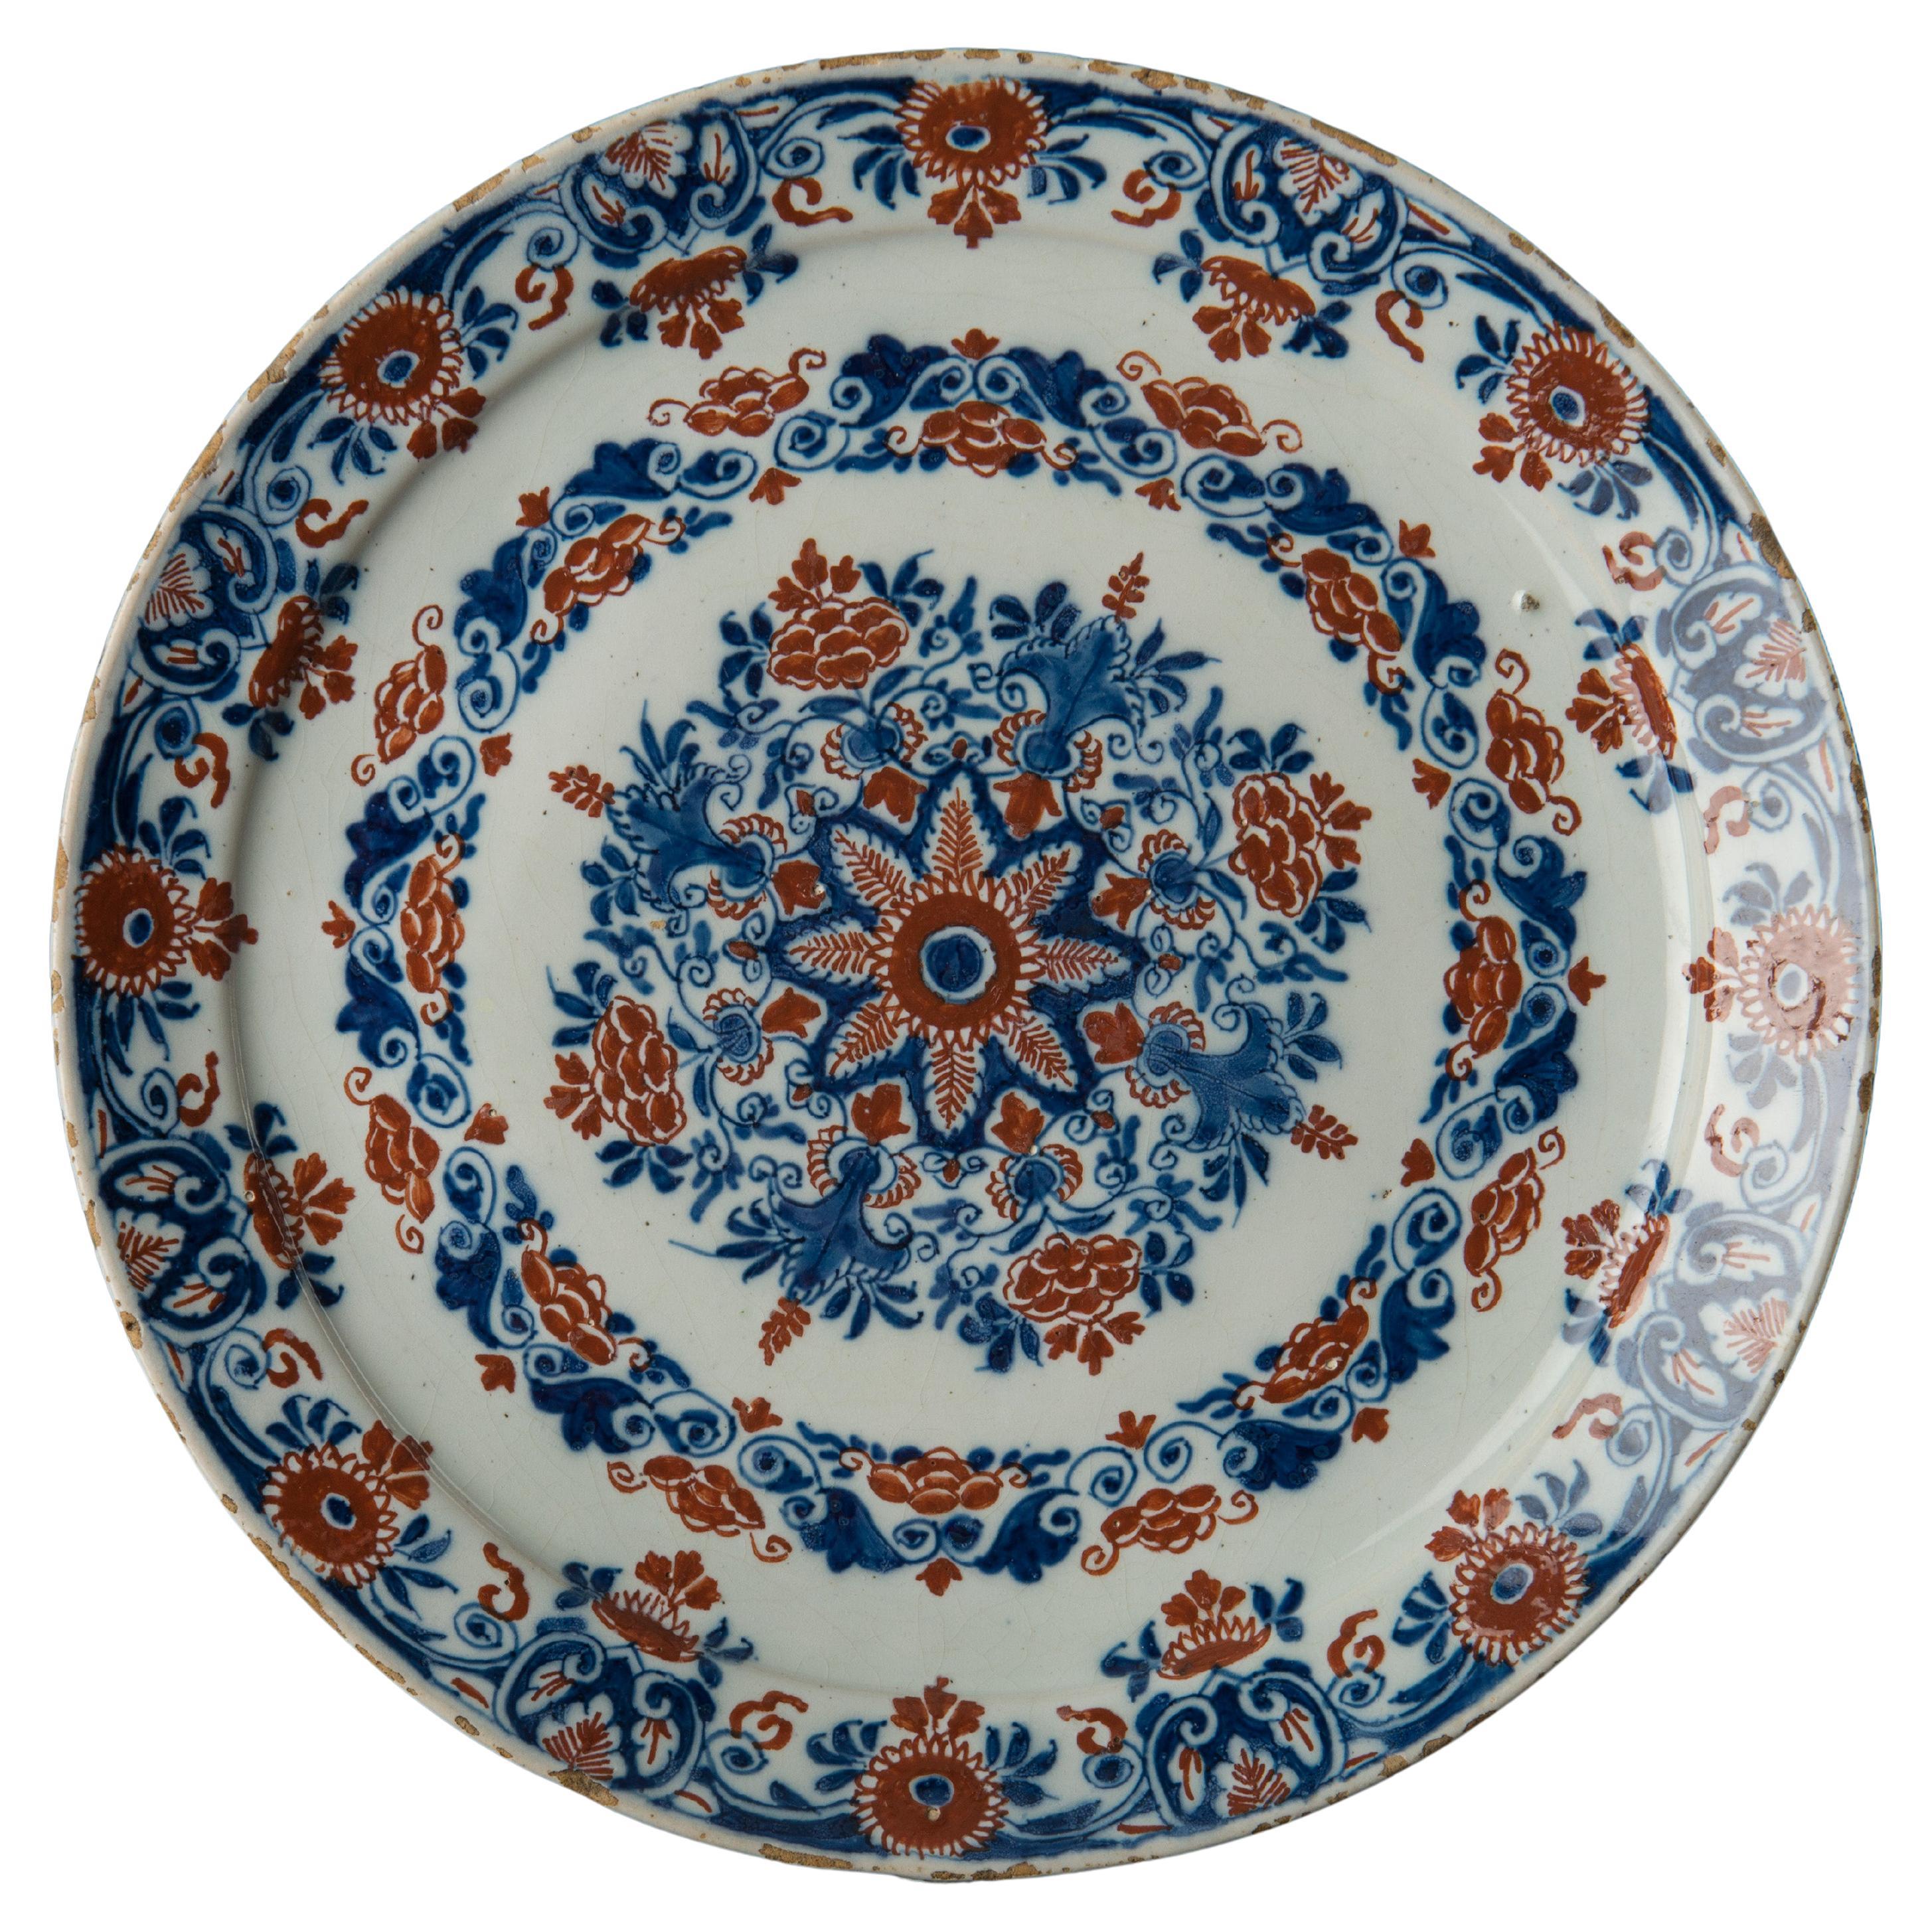 Cashmere Plate, Delft, 1701-1722 The Greek a Pottery